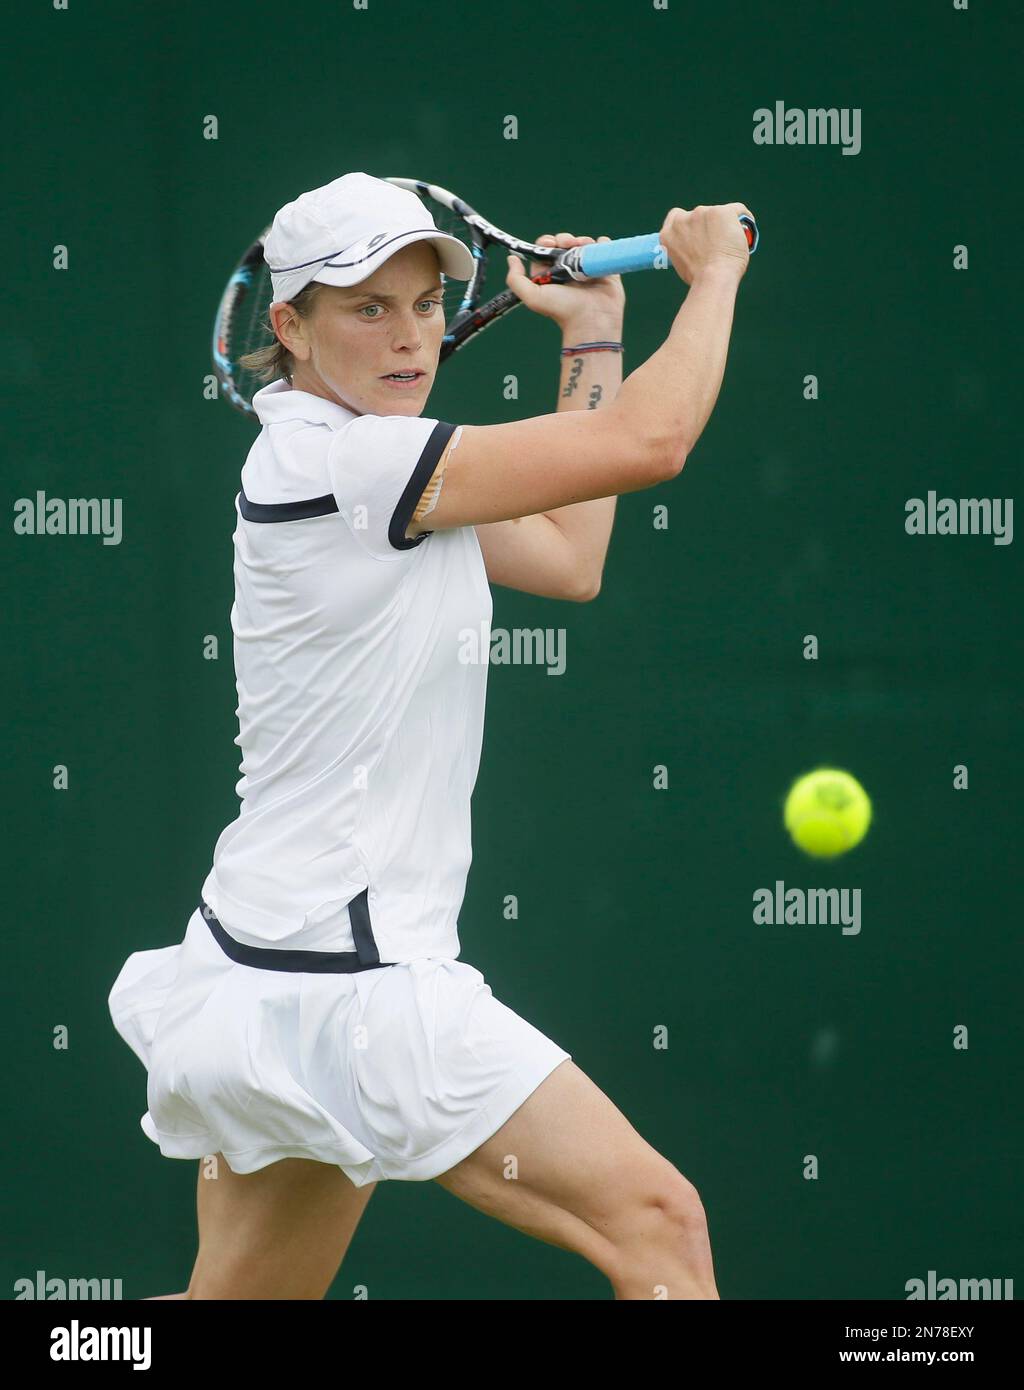 Romina Oprandi of Switzerland plays a shot to Alison Riske of the United States during their Women's first round singles match at the All England Lawn Tennis Championships in Wimbledon, London, Tuesday, June 25, 2013. (AP Photo/Alastair Grant) Stock Photo